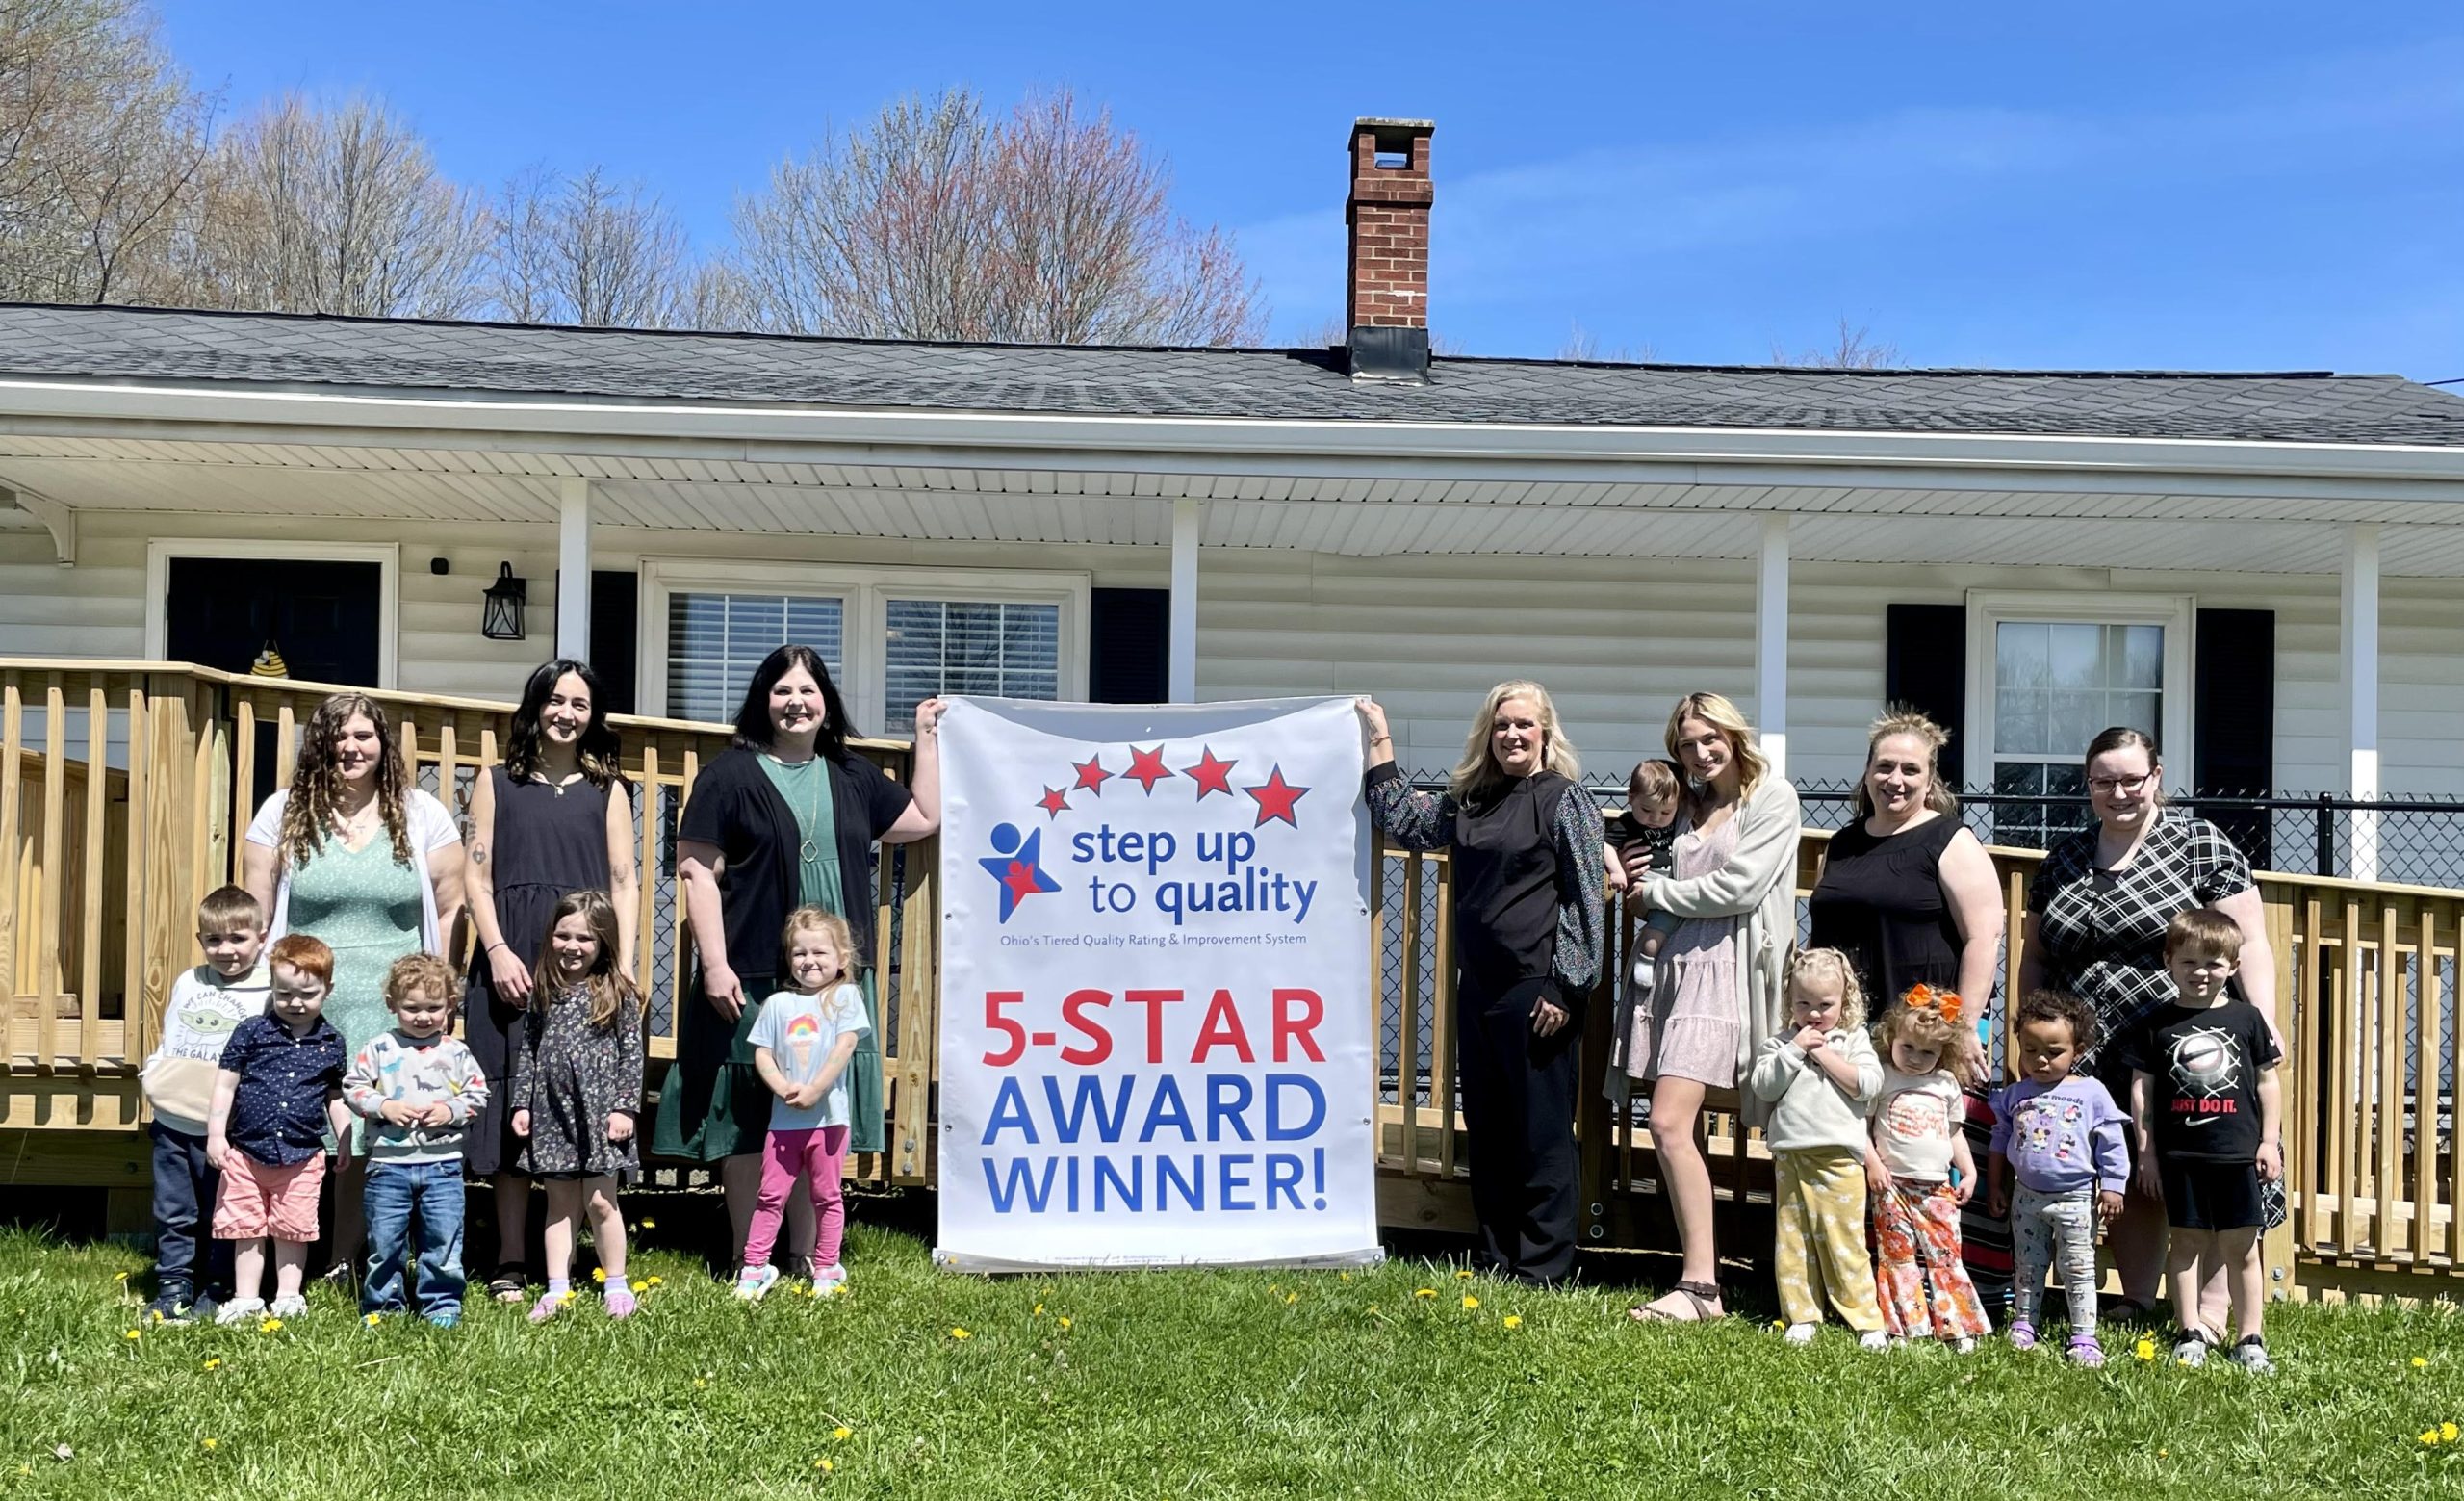 Clover Hill Early Learning Center earned 5-star rating from state